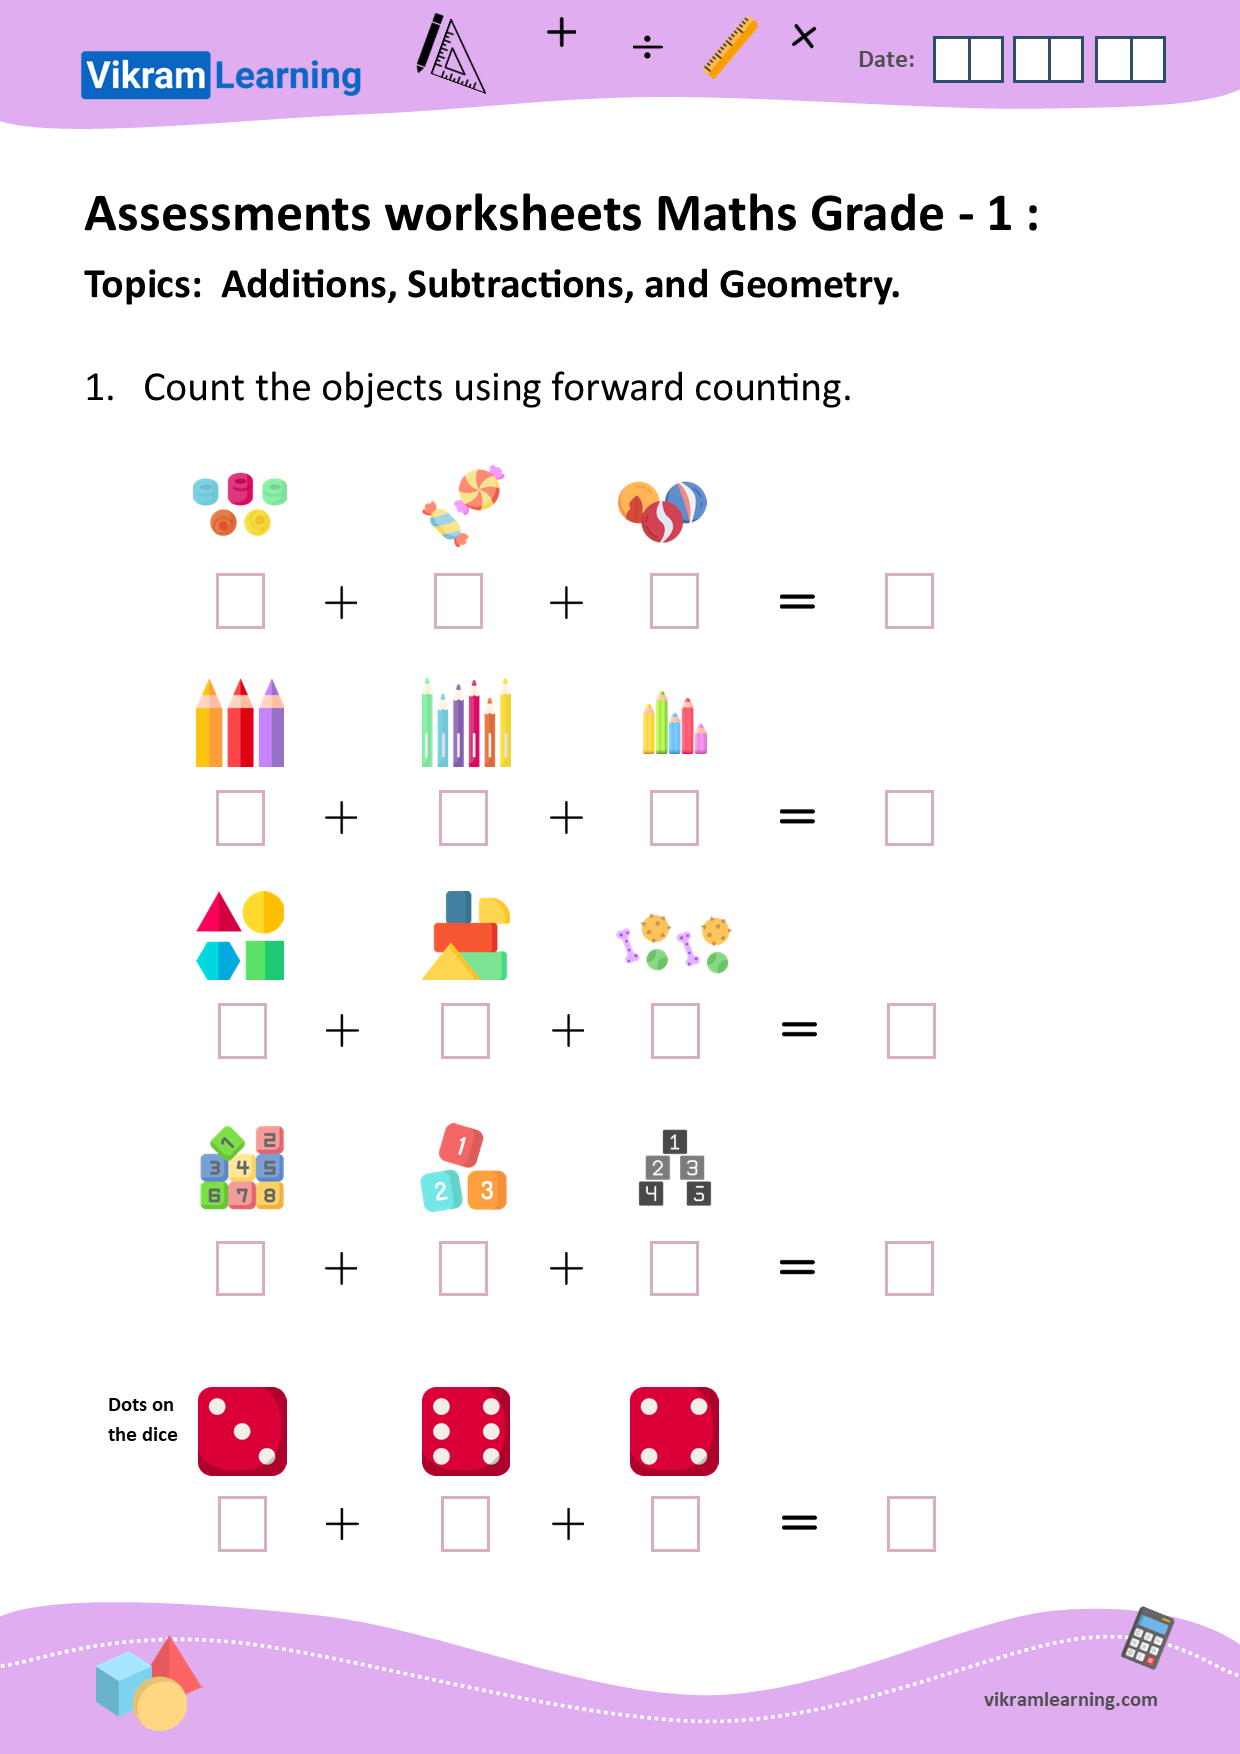 Download assessments worksheets maths grade - 1, additions, subtraction, and geometry worksheets